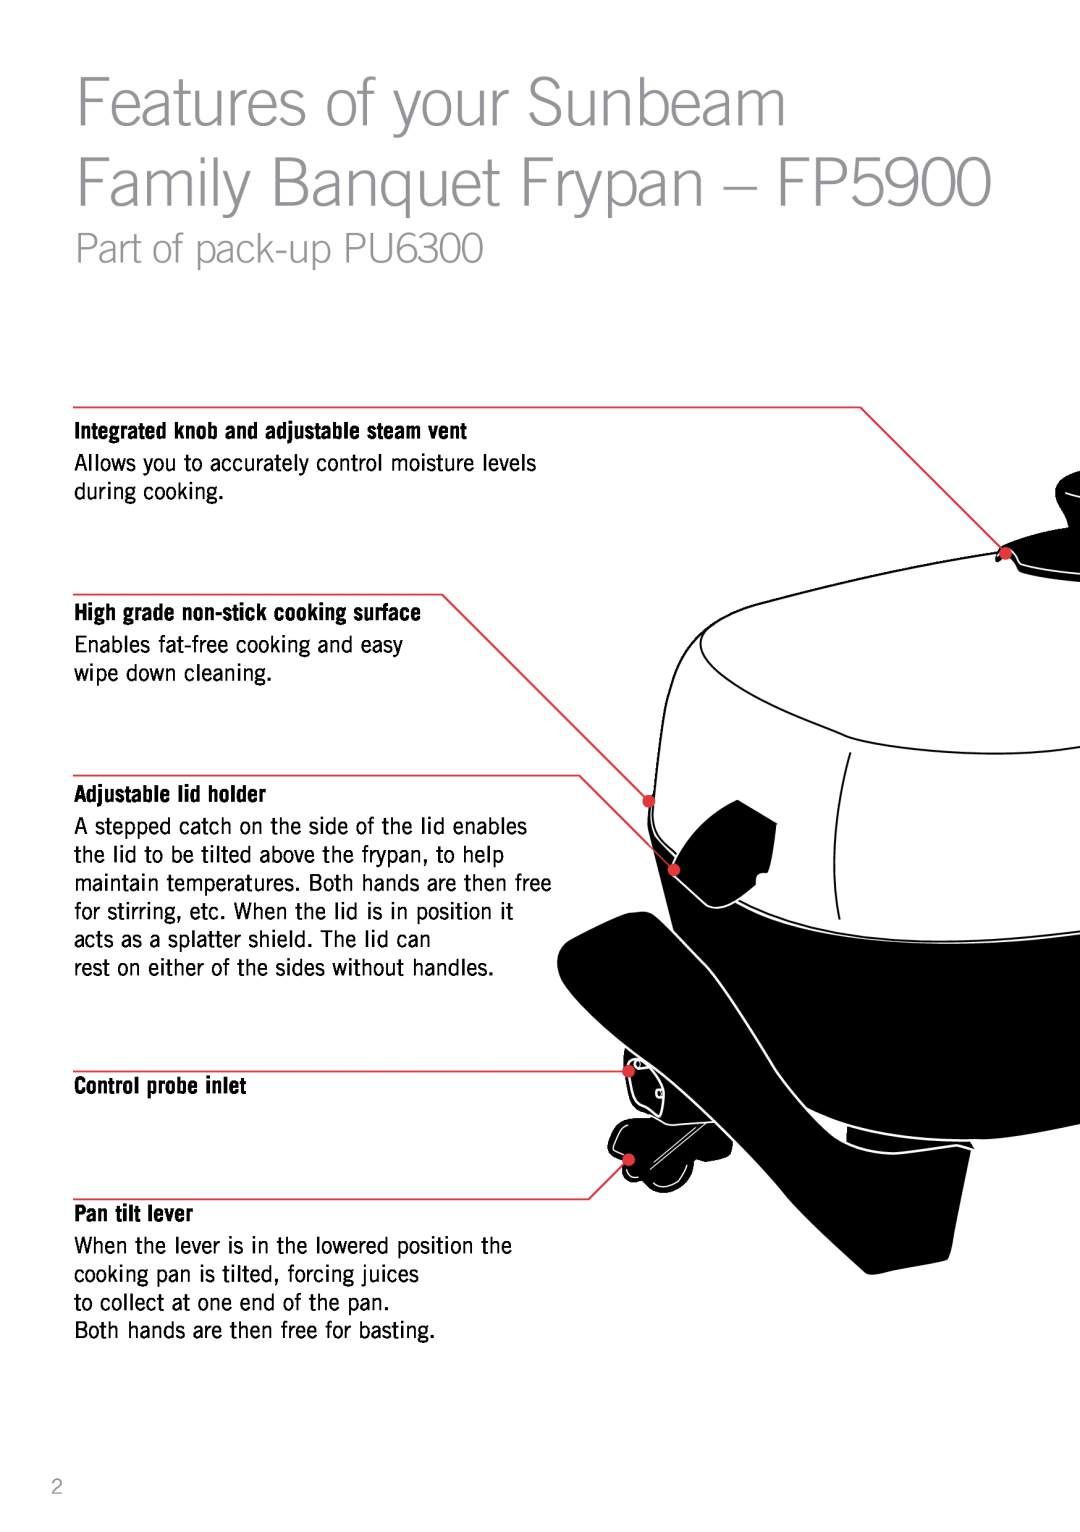 Sunbeam manual Part of pack-upPU6300, Integrated knob and adjustable steam vent, High grade non-stickcooking surface 